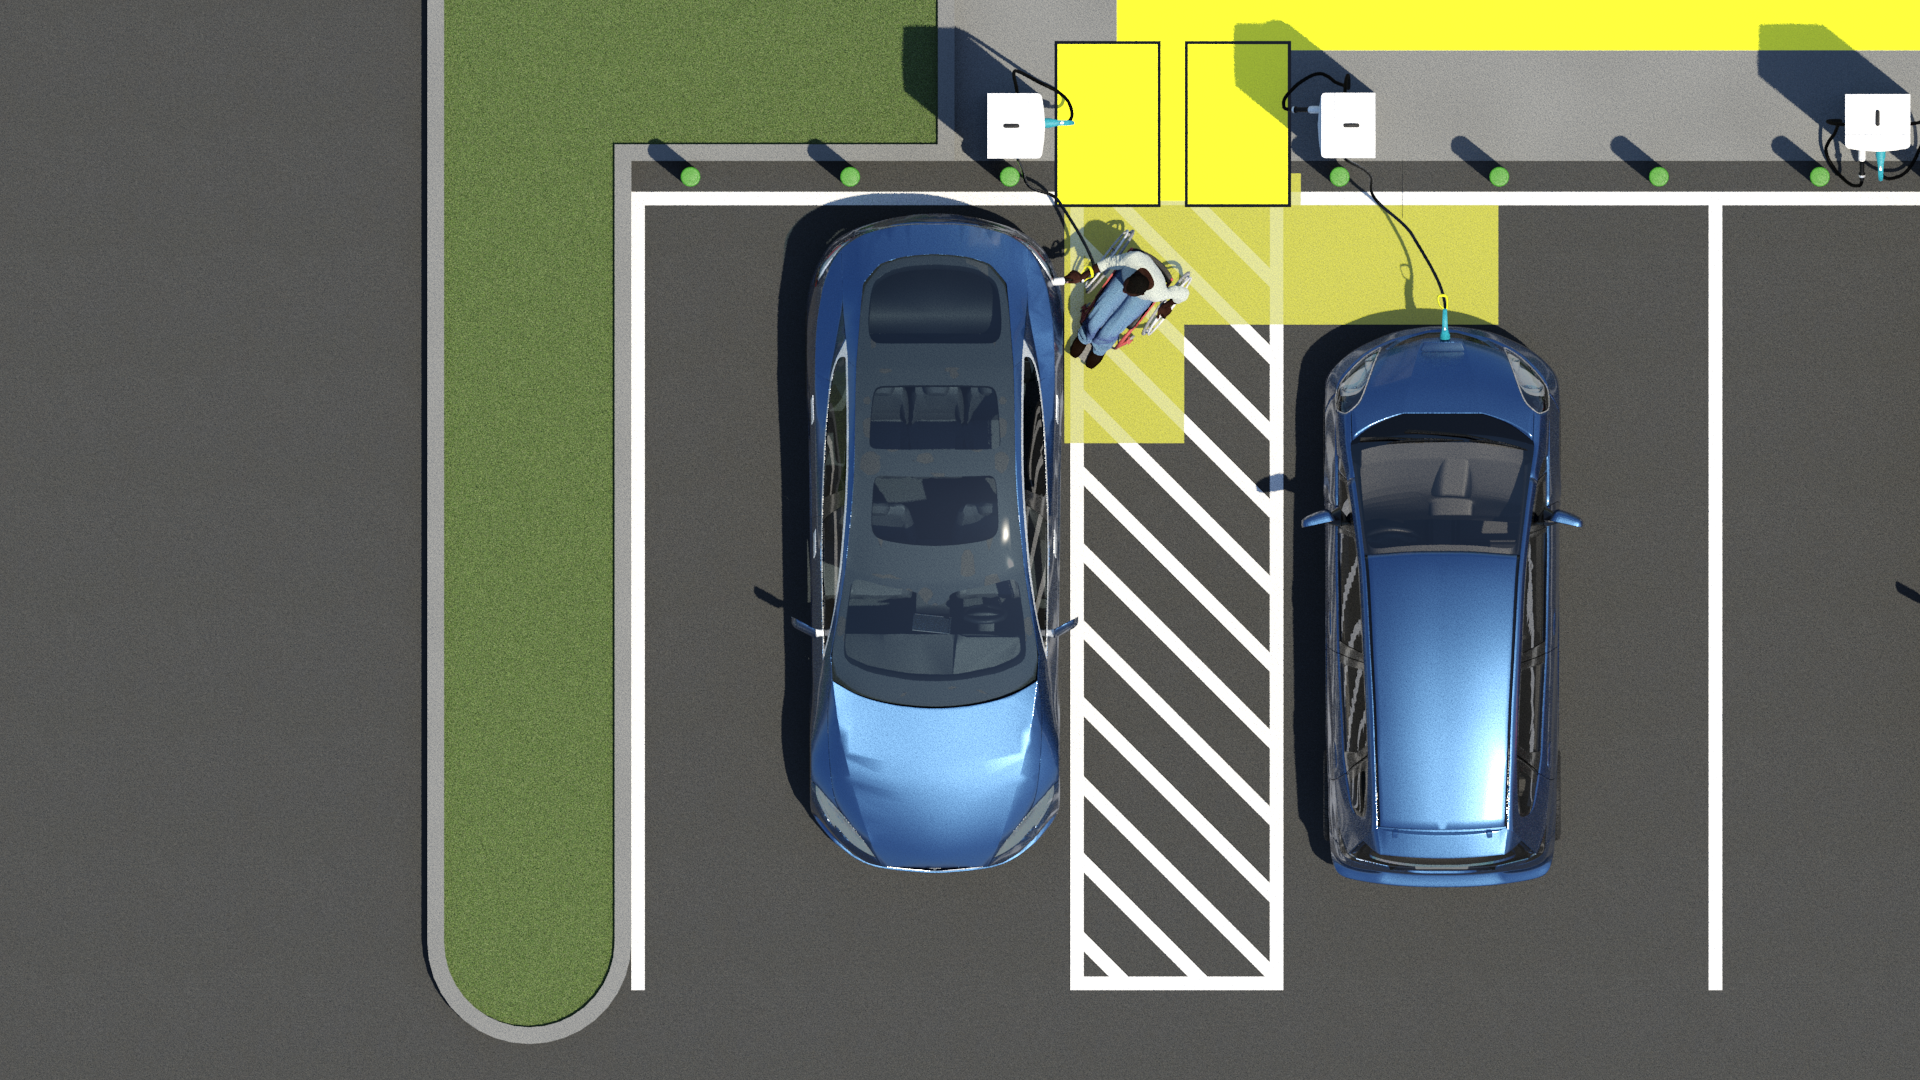 Plan view of two EV charging spaces sharing a center access aisle. Vehicle on the left is backed in to charging space with charger connected to driver side rear charging inlet. Vehicle on the right is pulled forward into charging space with charger connected to front vehicle charging inlet. Both EV chargers are at the head of the charging spaces and protected by green bollards. EV chargers are rotated so they both face the center access aisle. (The EV charger on the left is rotated to face the right and has clear floor space on the right, and the EV charger on the right is rotated to face the left and has clear floor space on the left). 